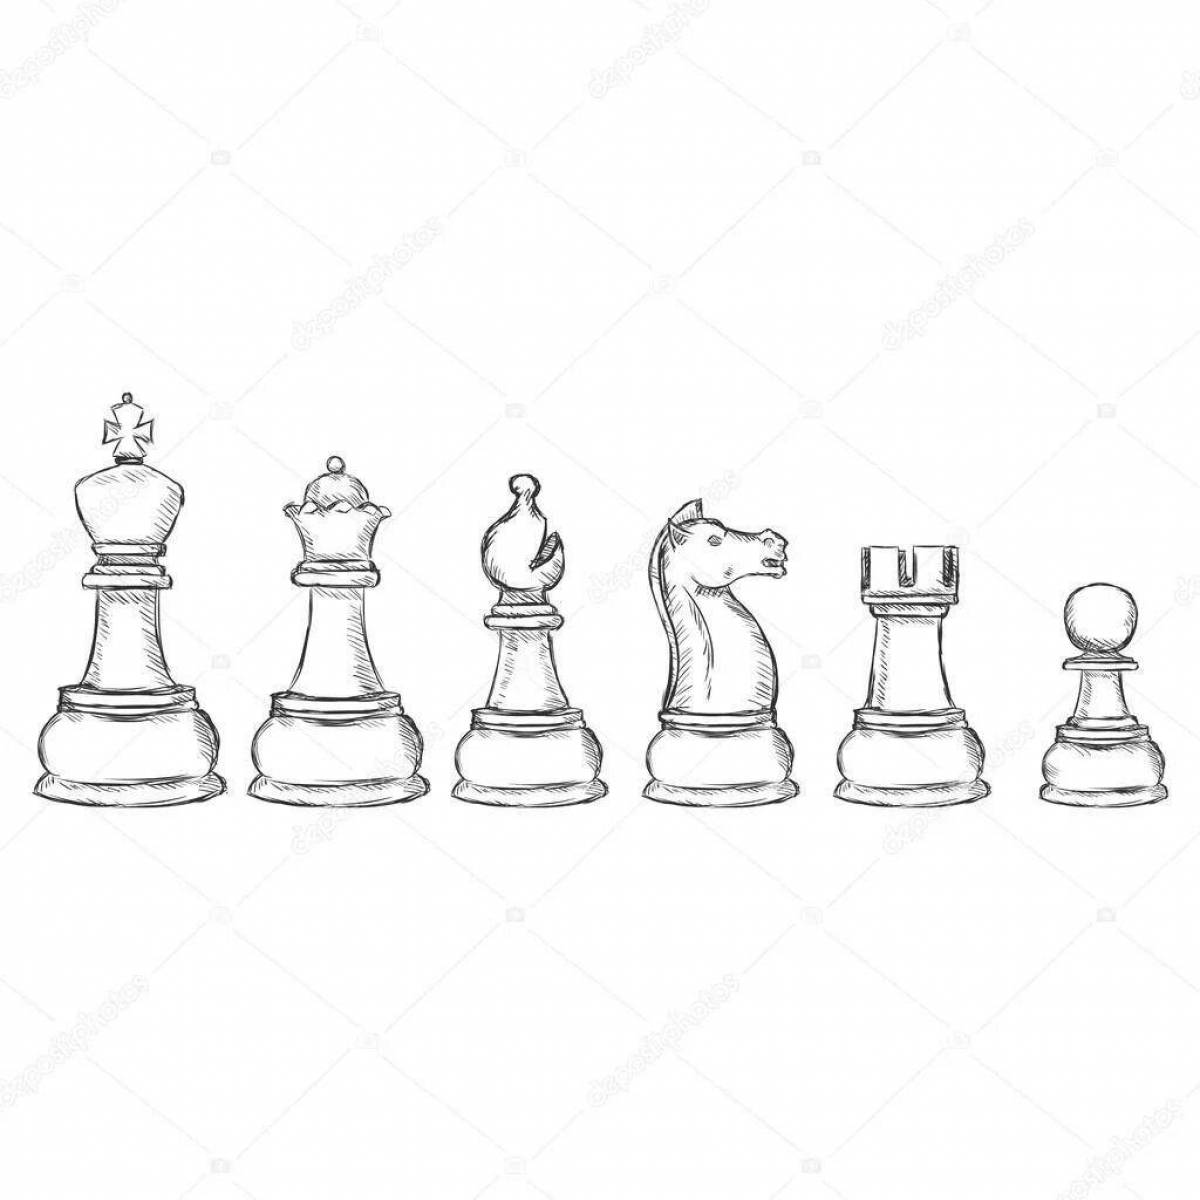 Coloring for bright chess pieces for kids